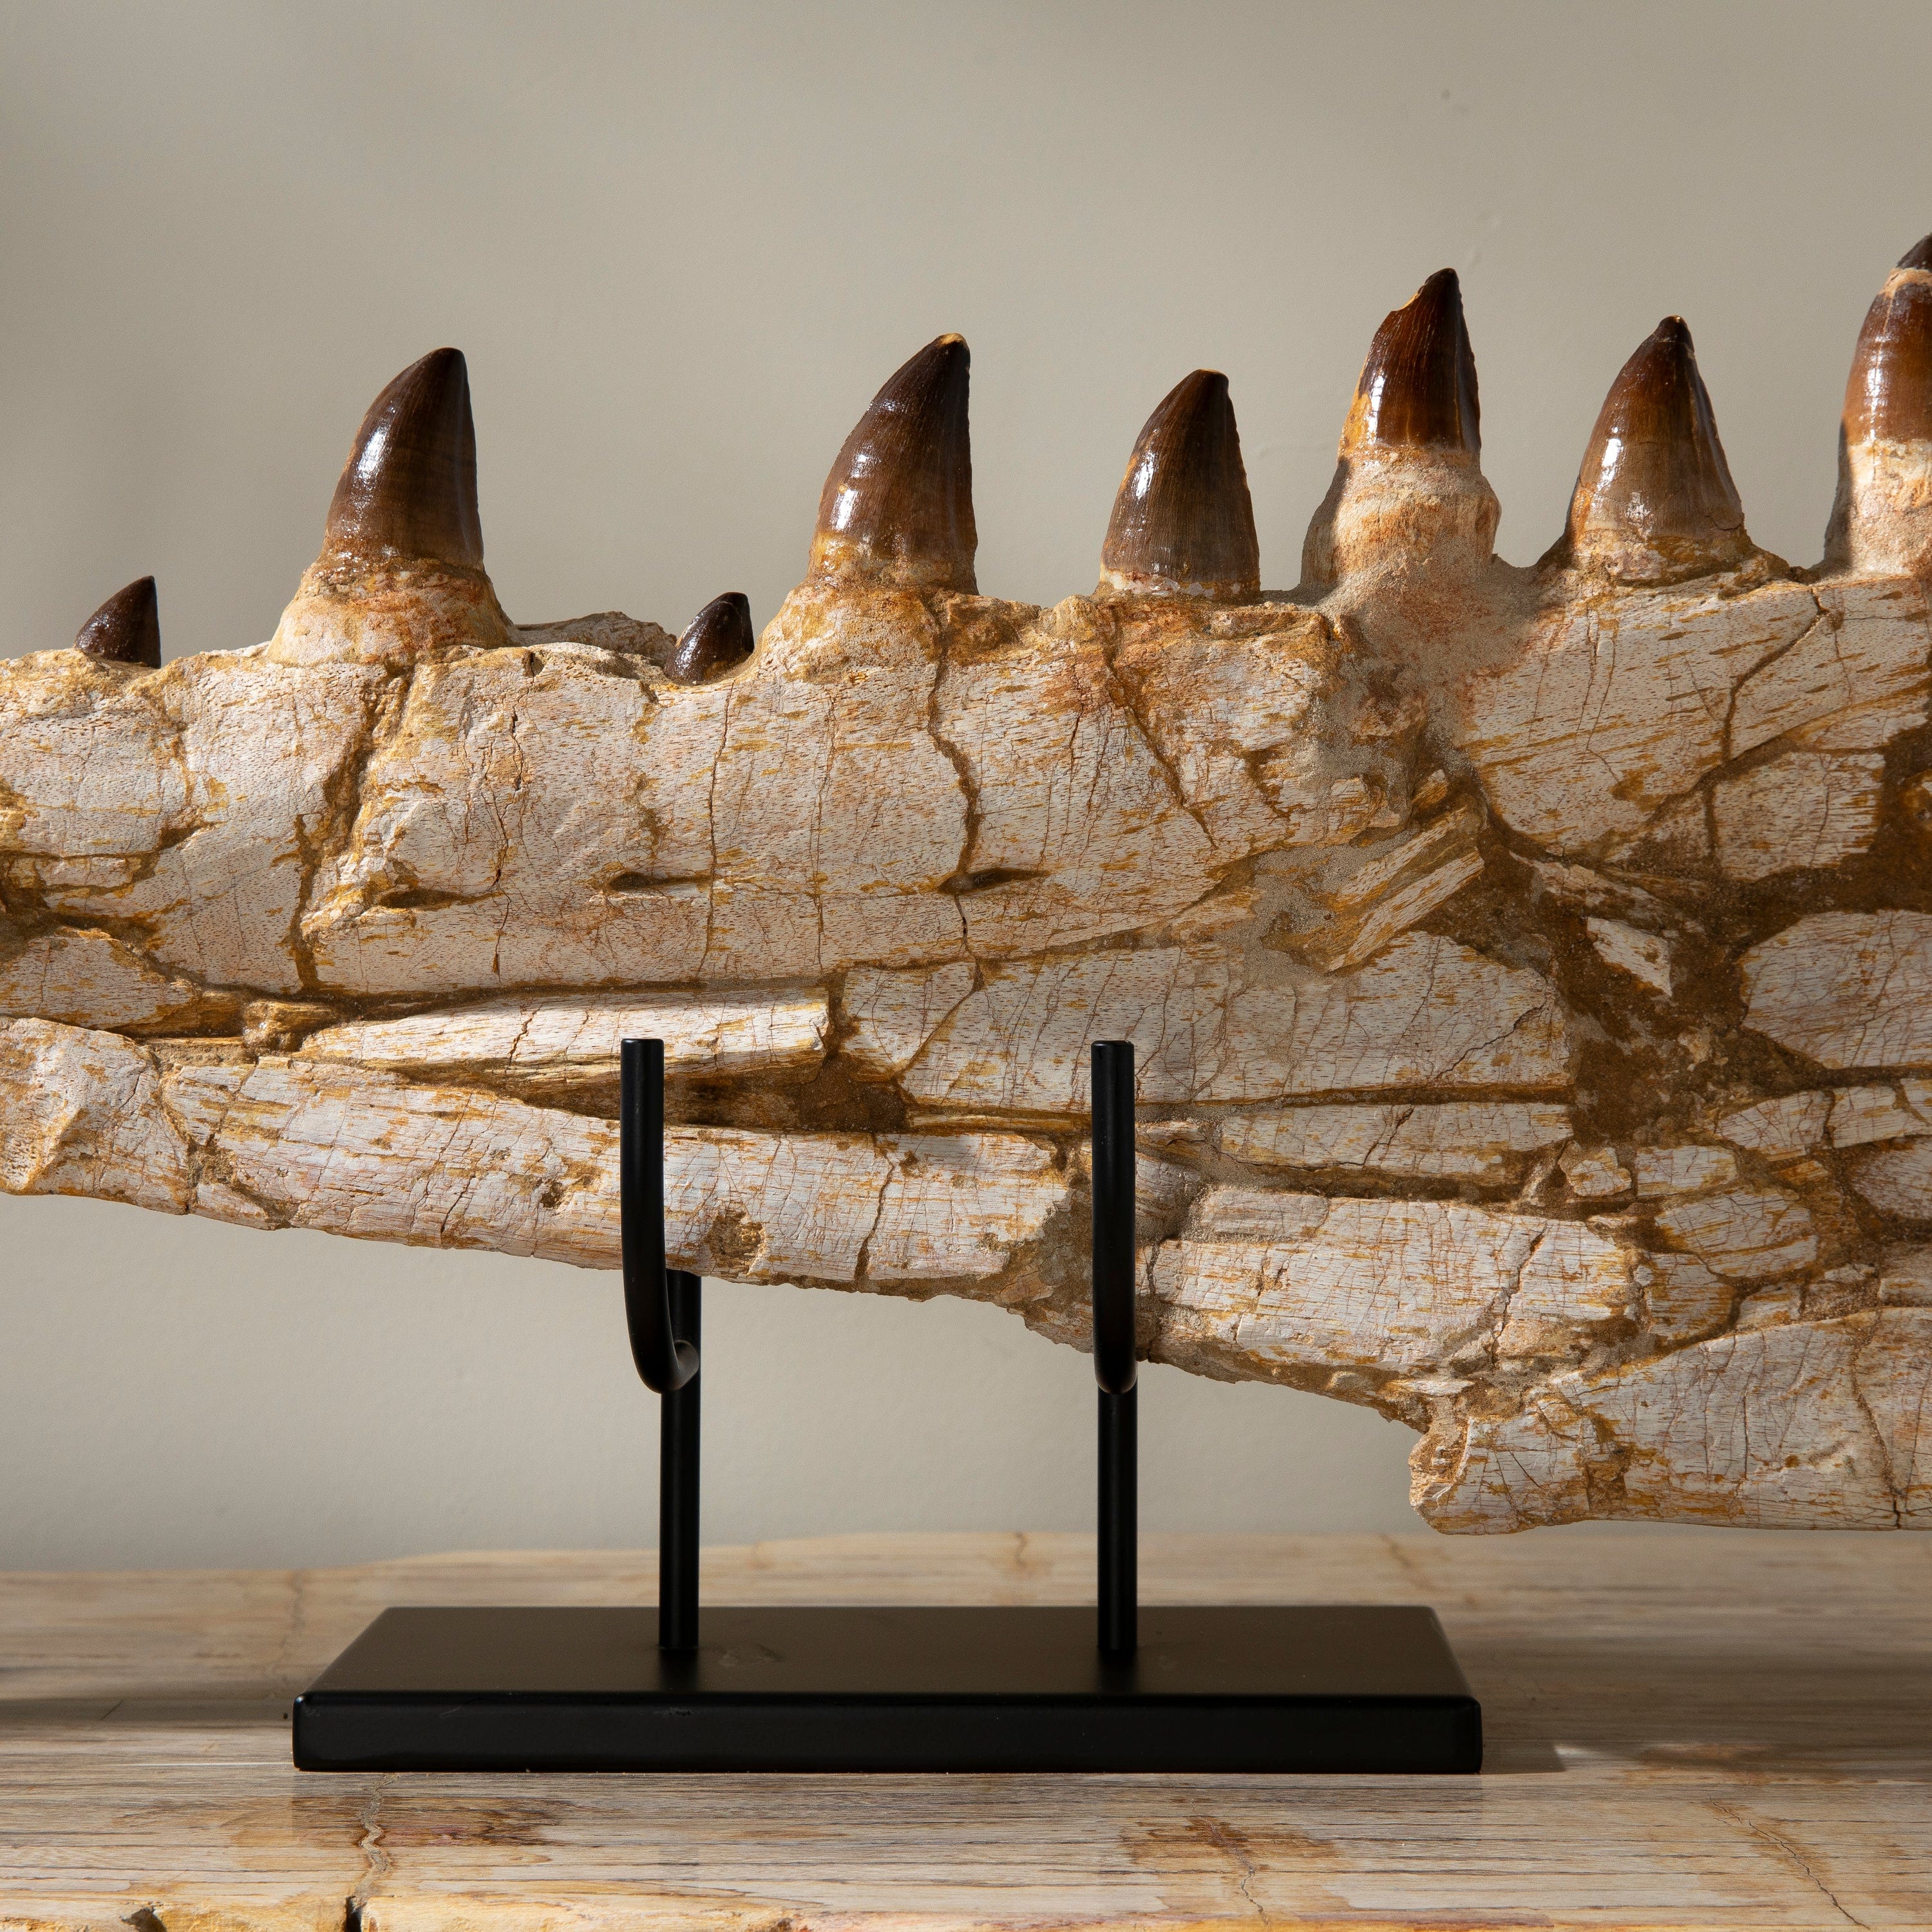 Kalifano Mosasaurus Fossils Mosasaurus Jaw and Teeth Fossil in Matrix - 53in. MOST22000.001